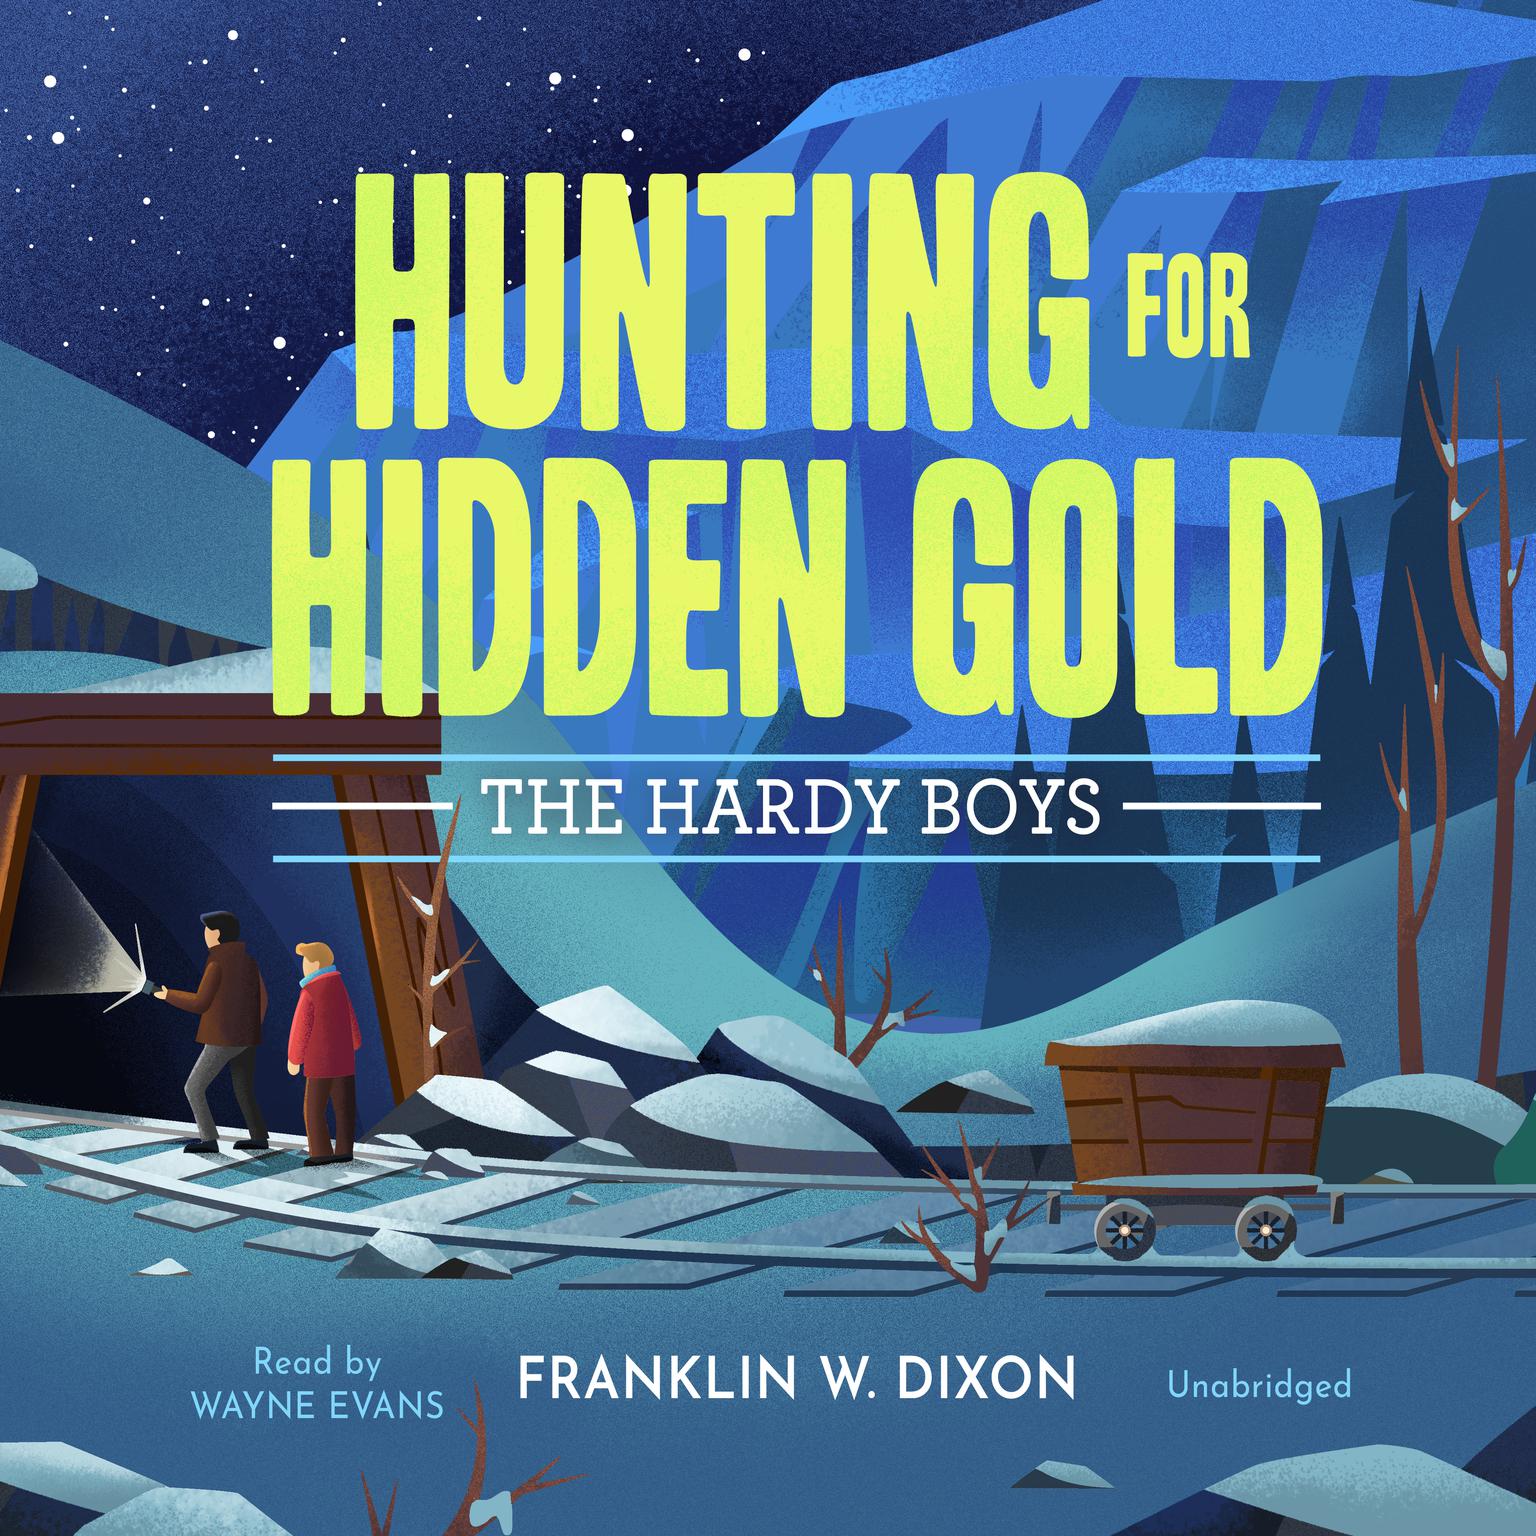 Hunting for Hidden Gold: The Hardy Boys book 5 Audiobook, by Franklin W. Dixon